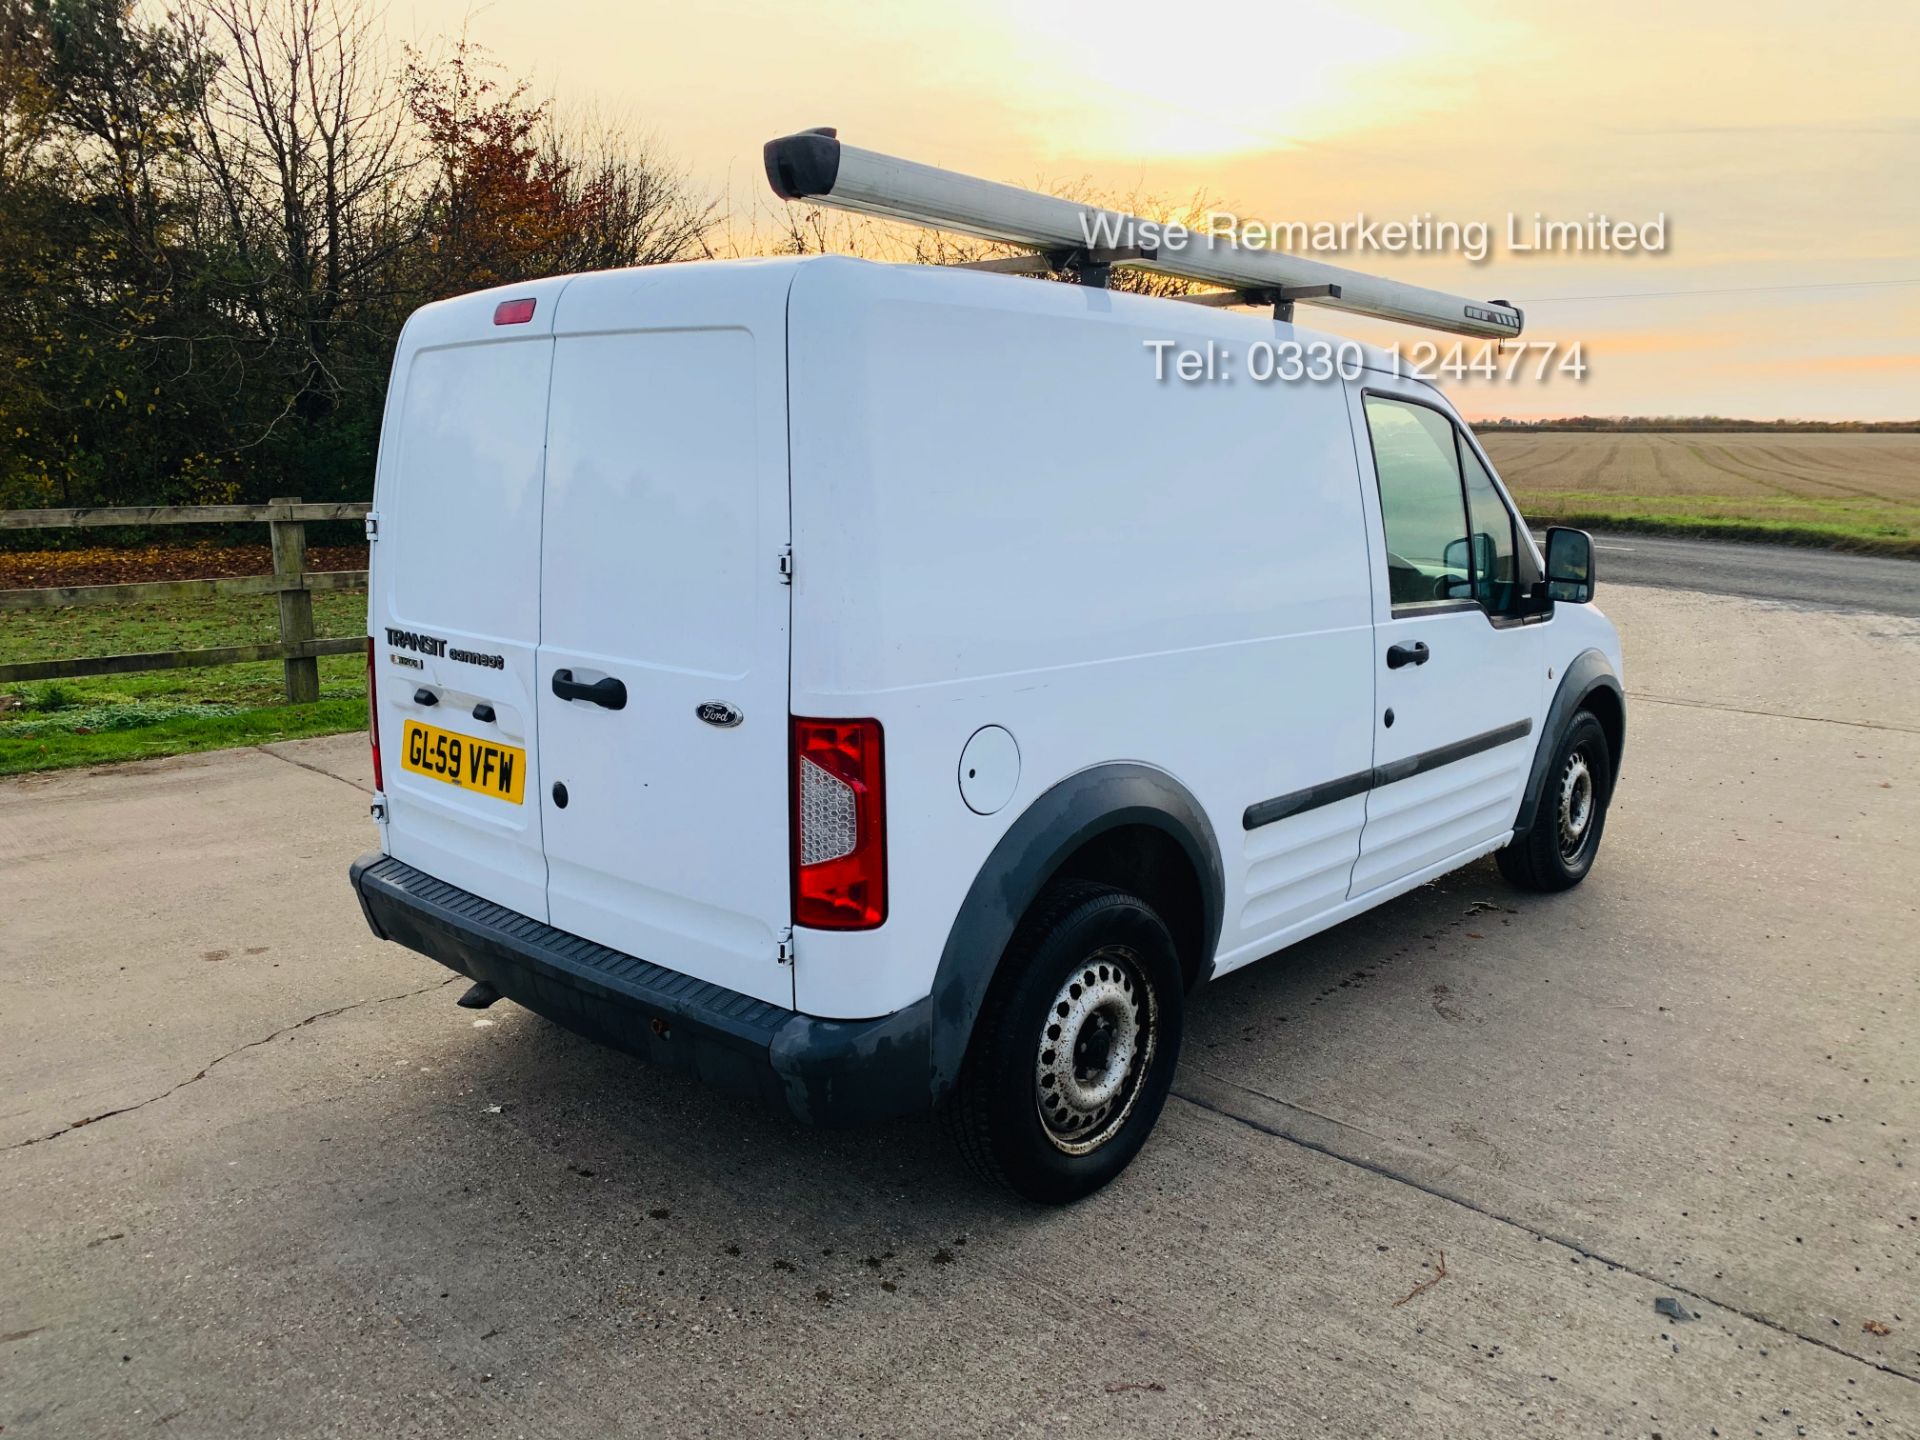 Ford Transit Connect T200 1.8 - 2010 Model - Side Loading Door - Ply Lined - Image 2 of 19